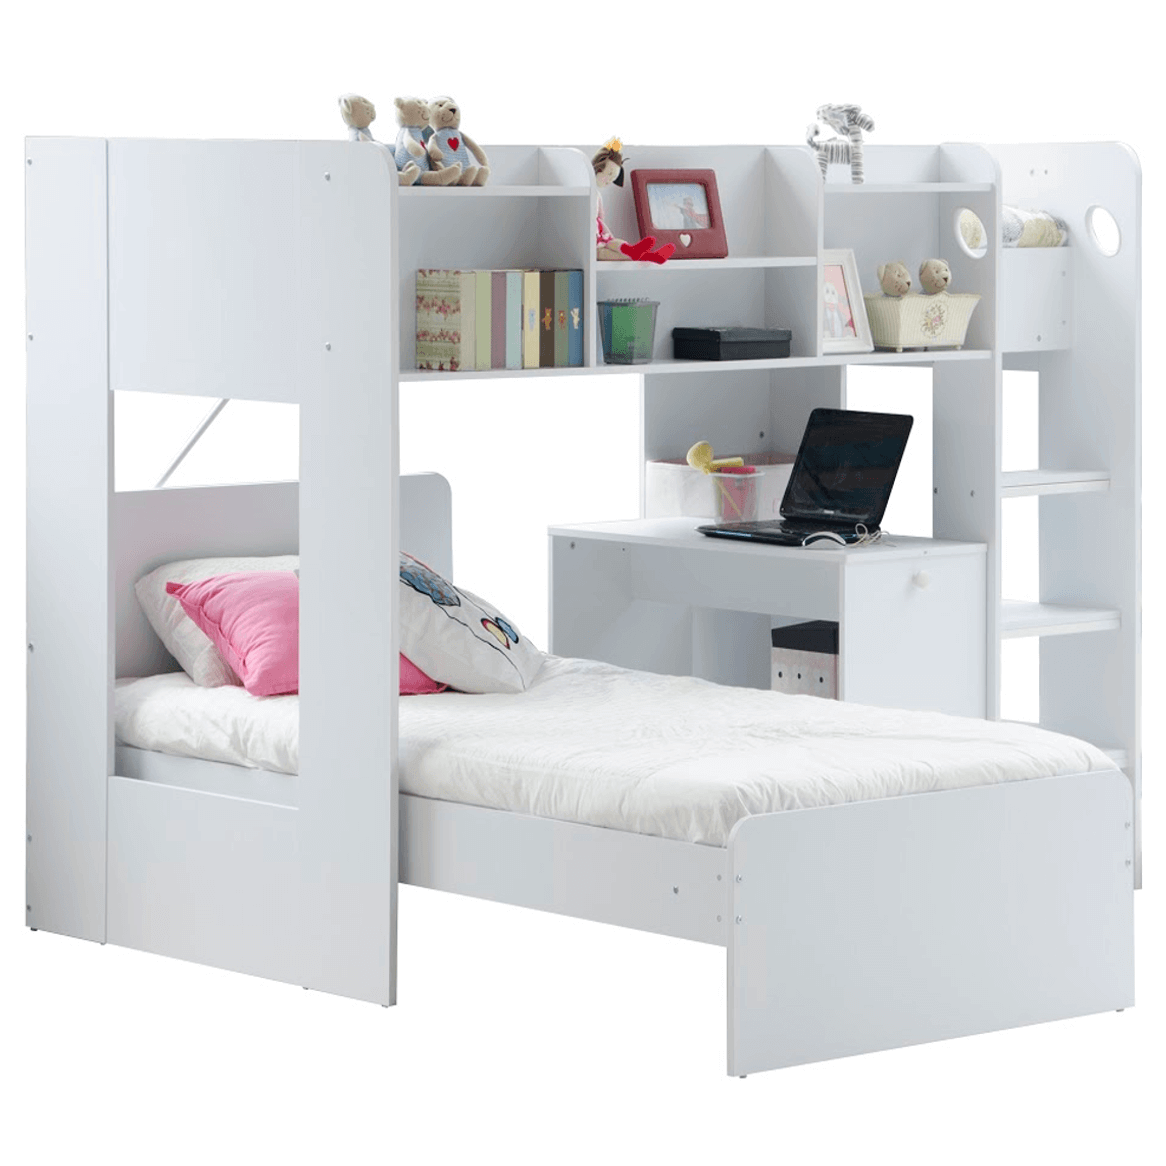 Wizard White Bunk Bed With Storage, Bunk Bed With Storage Shelves